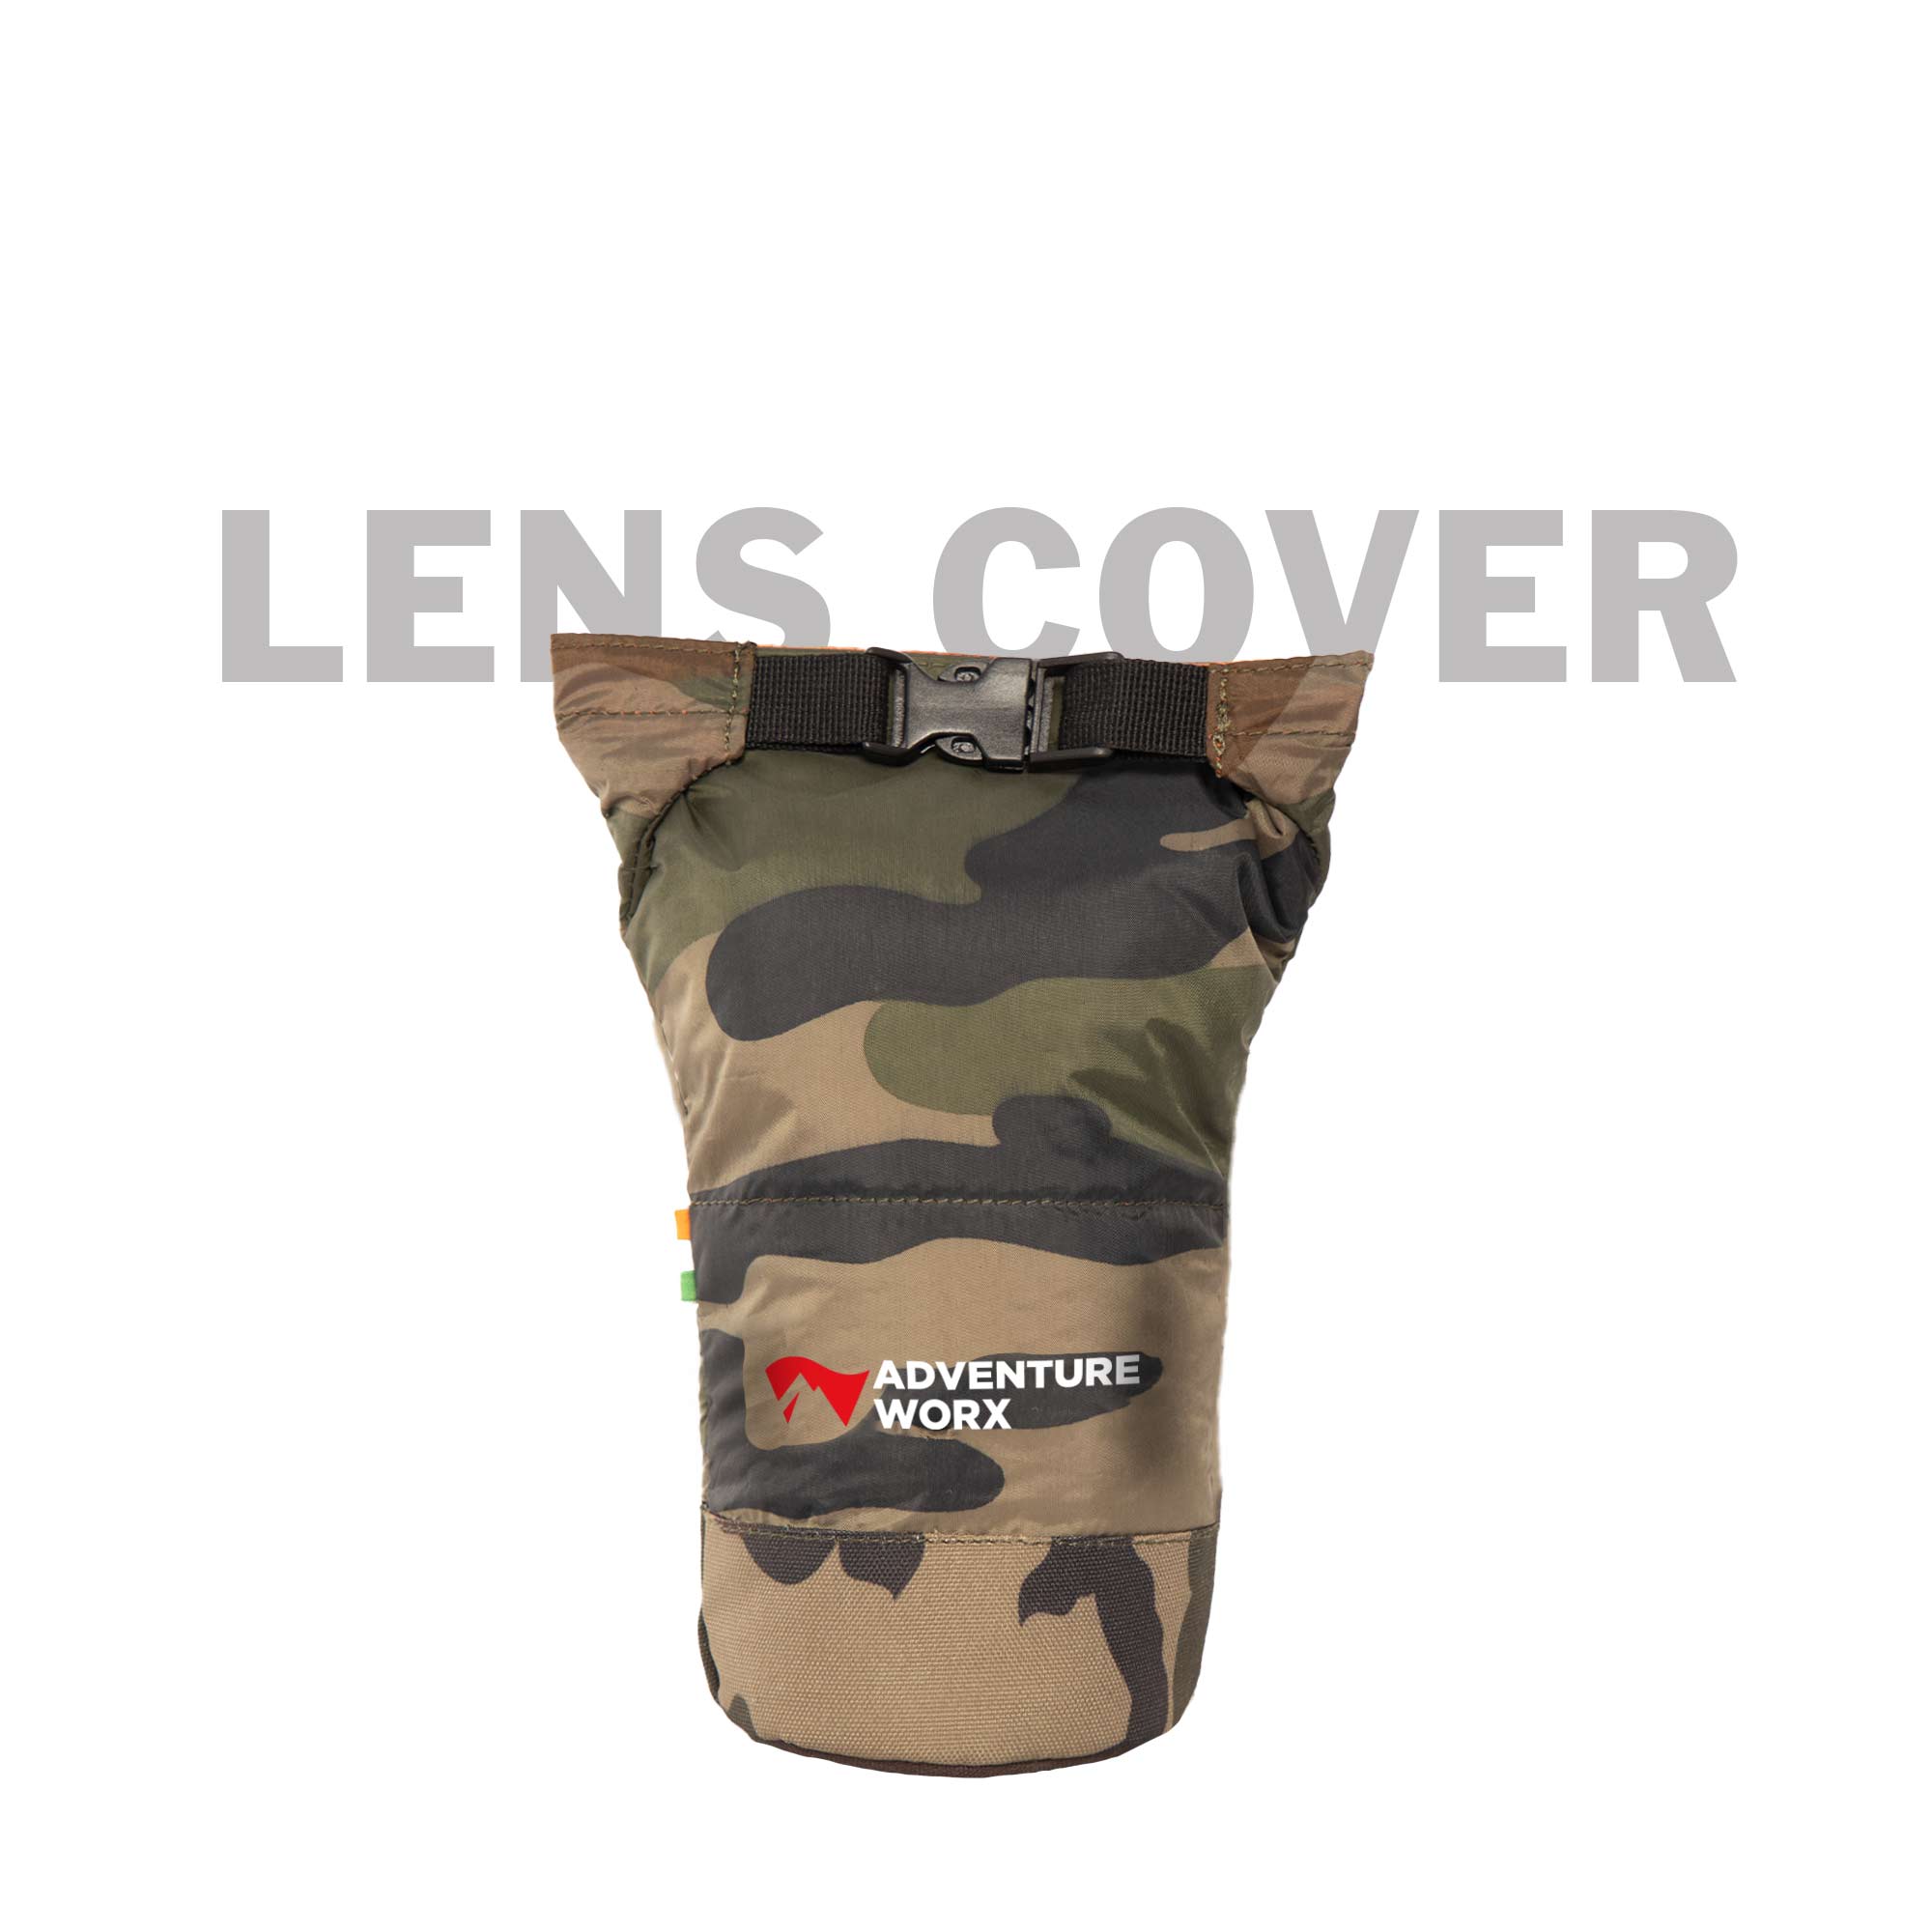 Padded Lens Covers